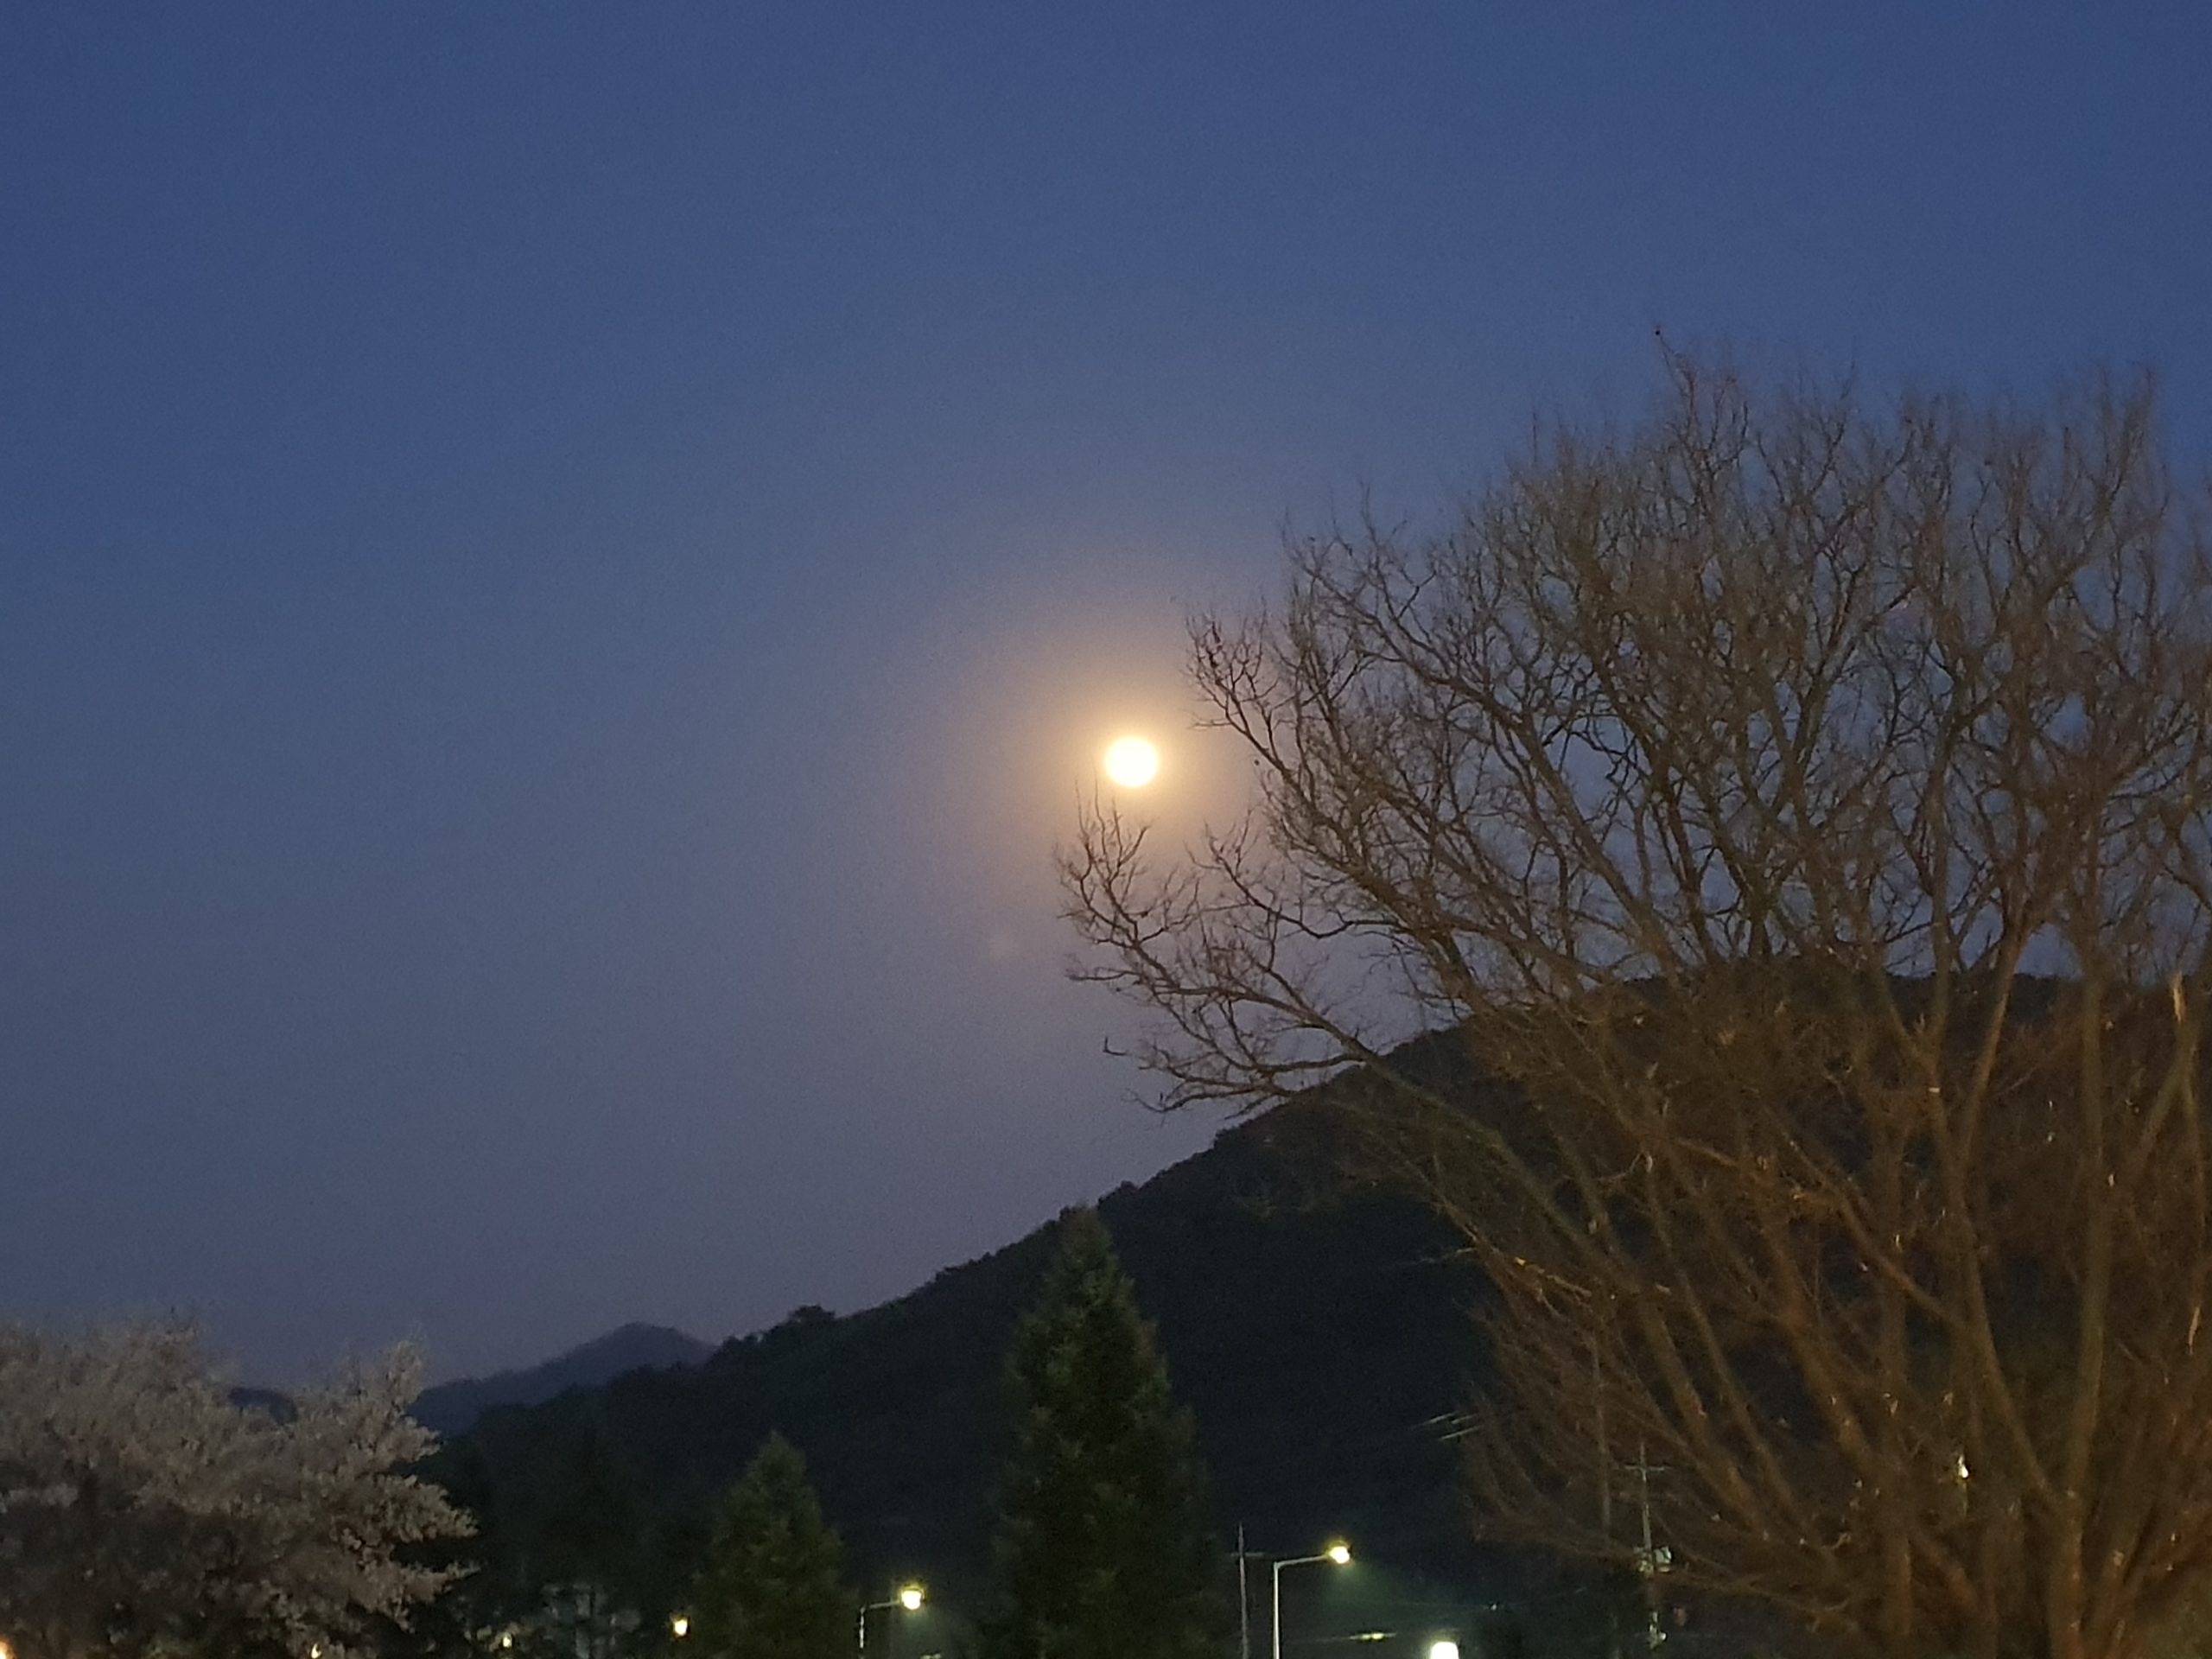 The moon in a dark blue sky with a leafless tree in the foreground